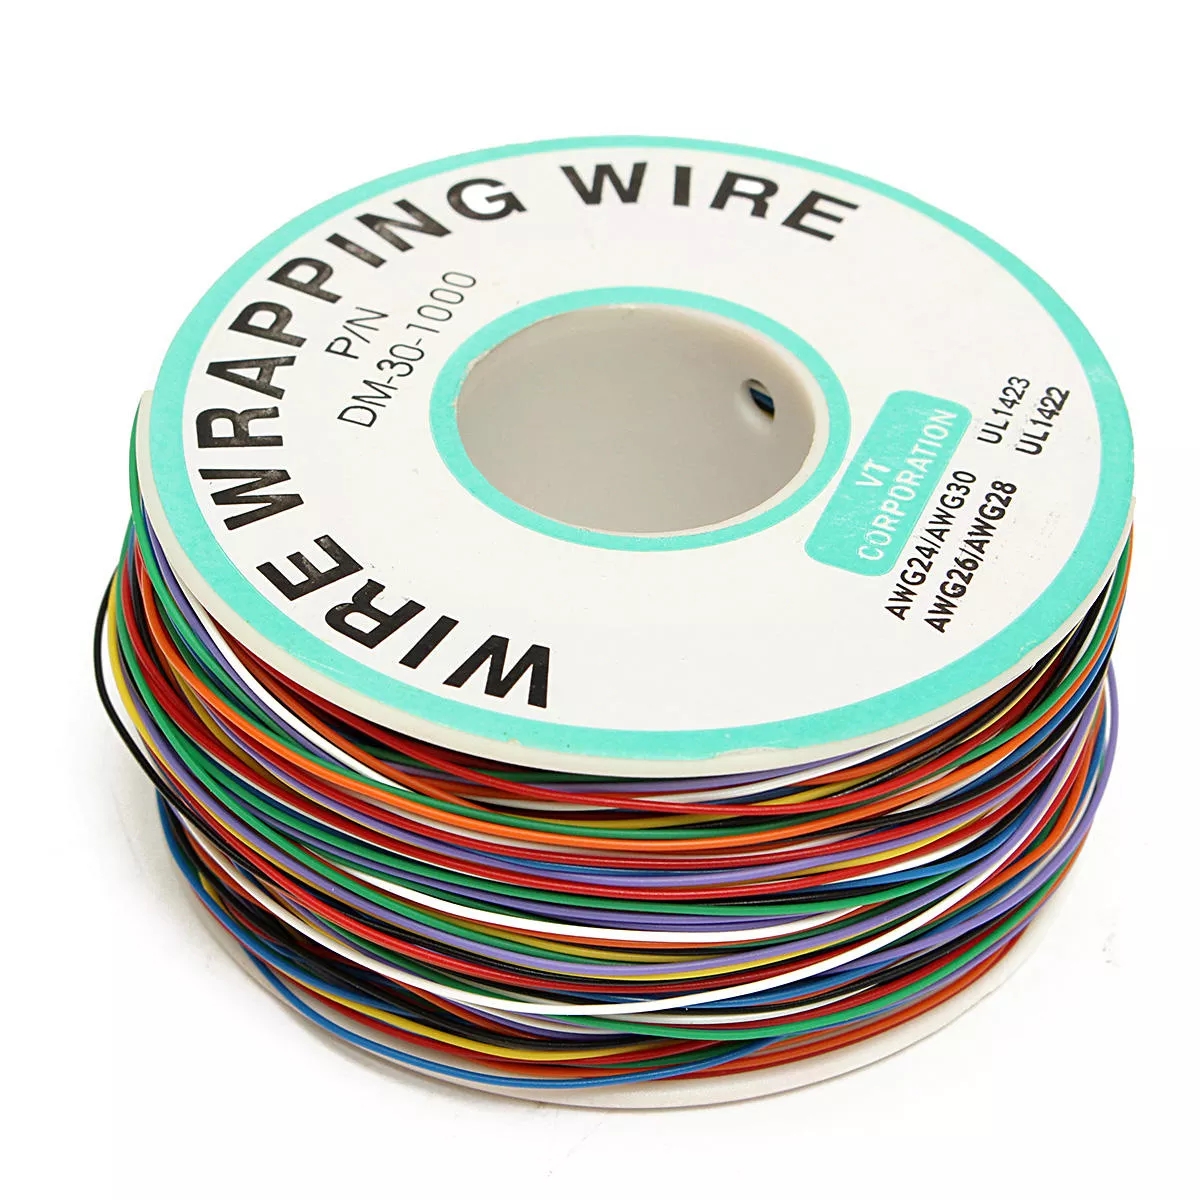 5Pcs-DANIU-250M-8-Wire-Colored-Insulated-PN-B-30-1000-30AWG-Wire-Wrapping-Cable-Wrap-Reel-1597178-8